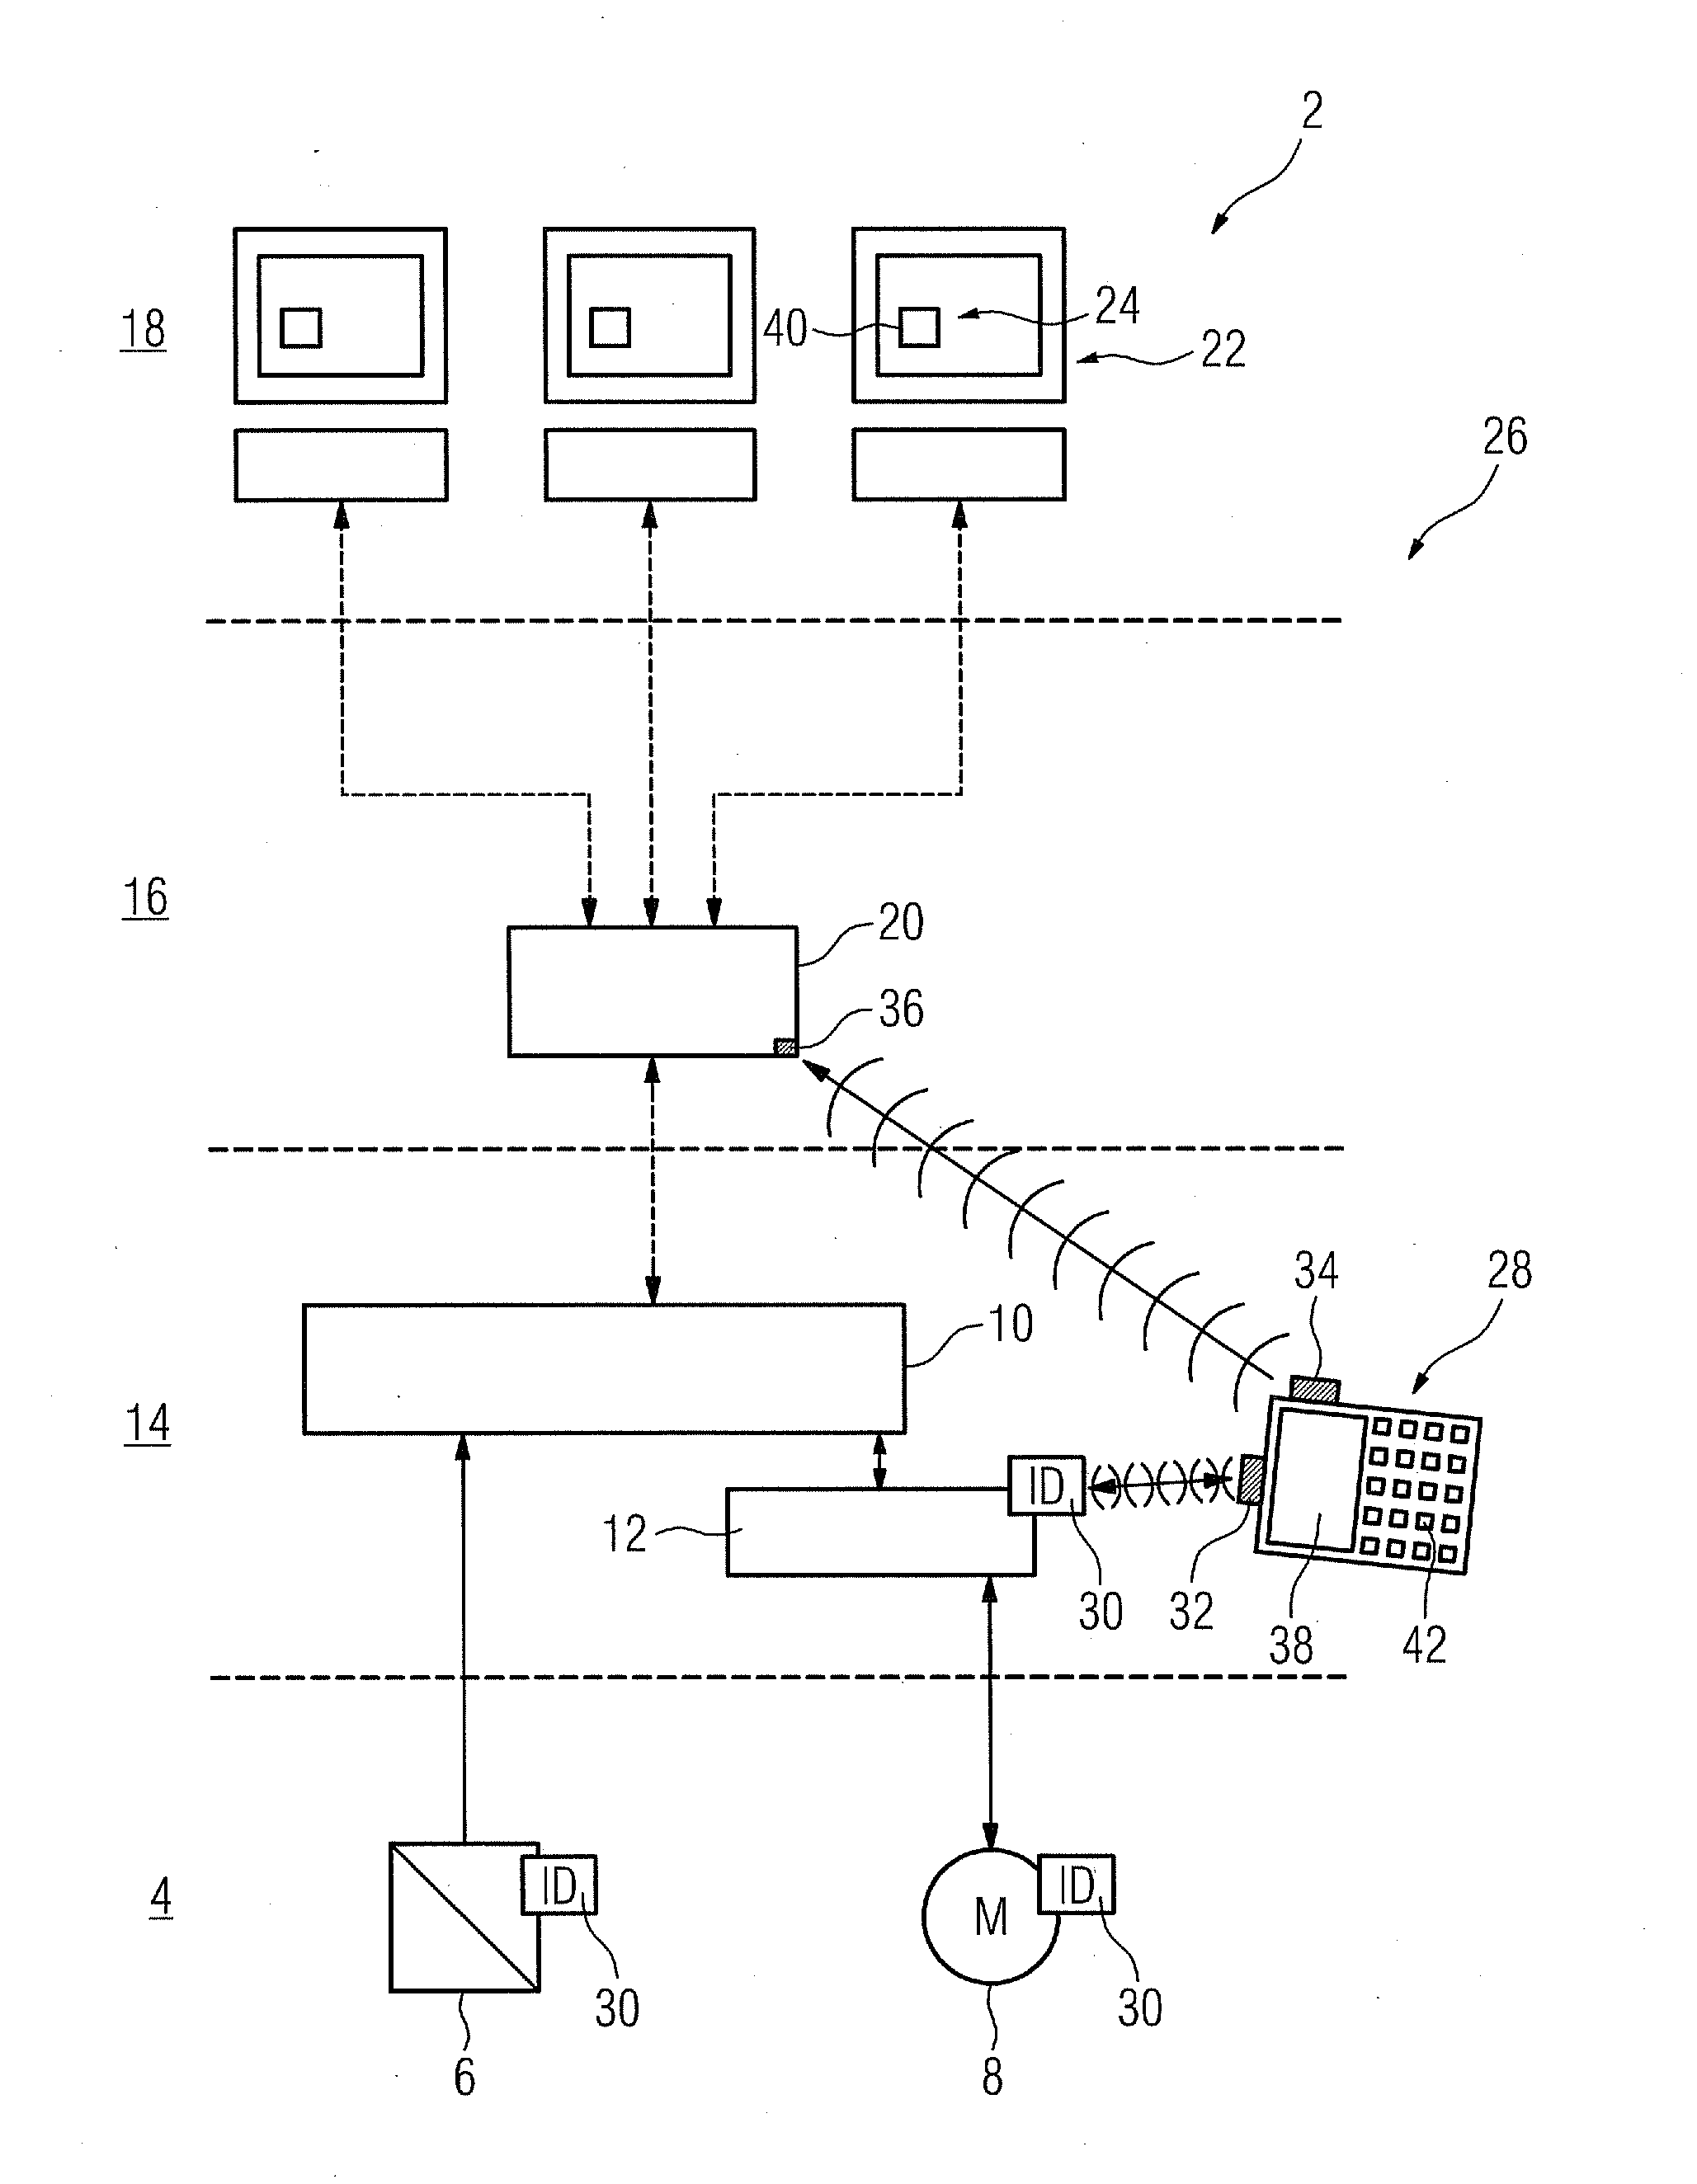 Method for Isolating a Plant Device of an Industrial Plant